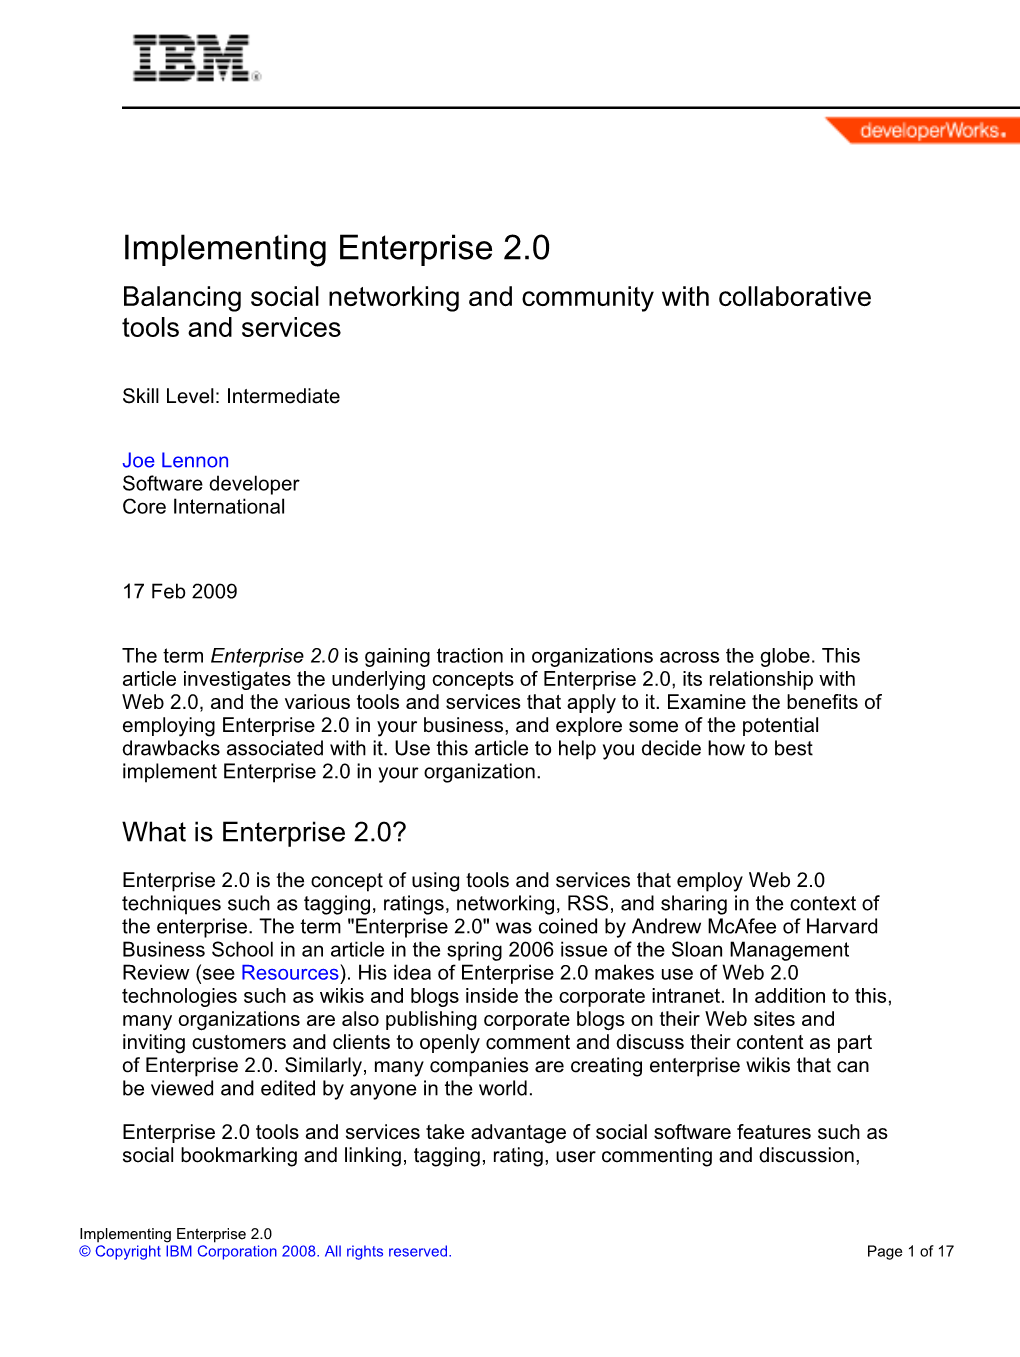 Implementing Enterprise 2.0: Balancing Social Networking And